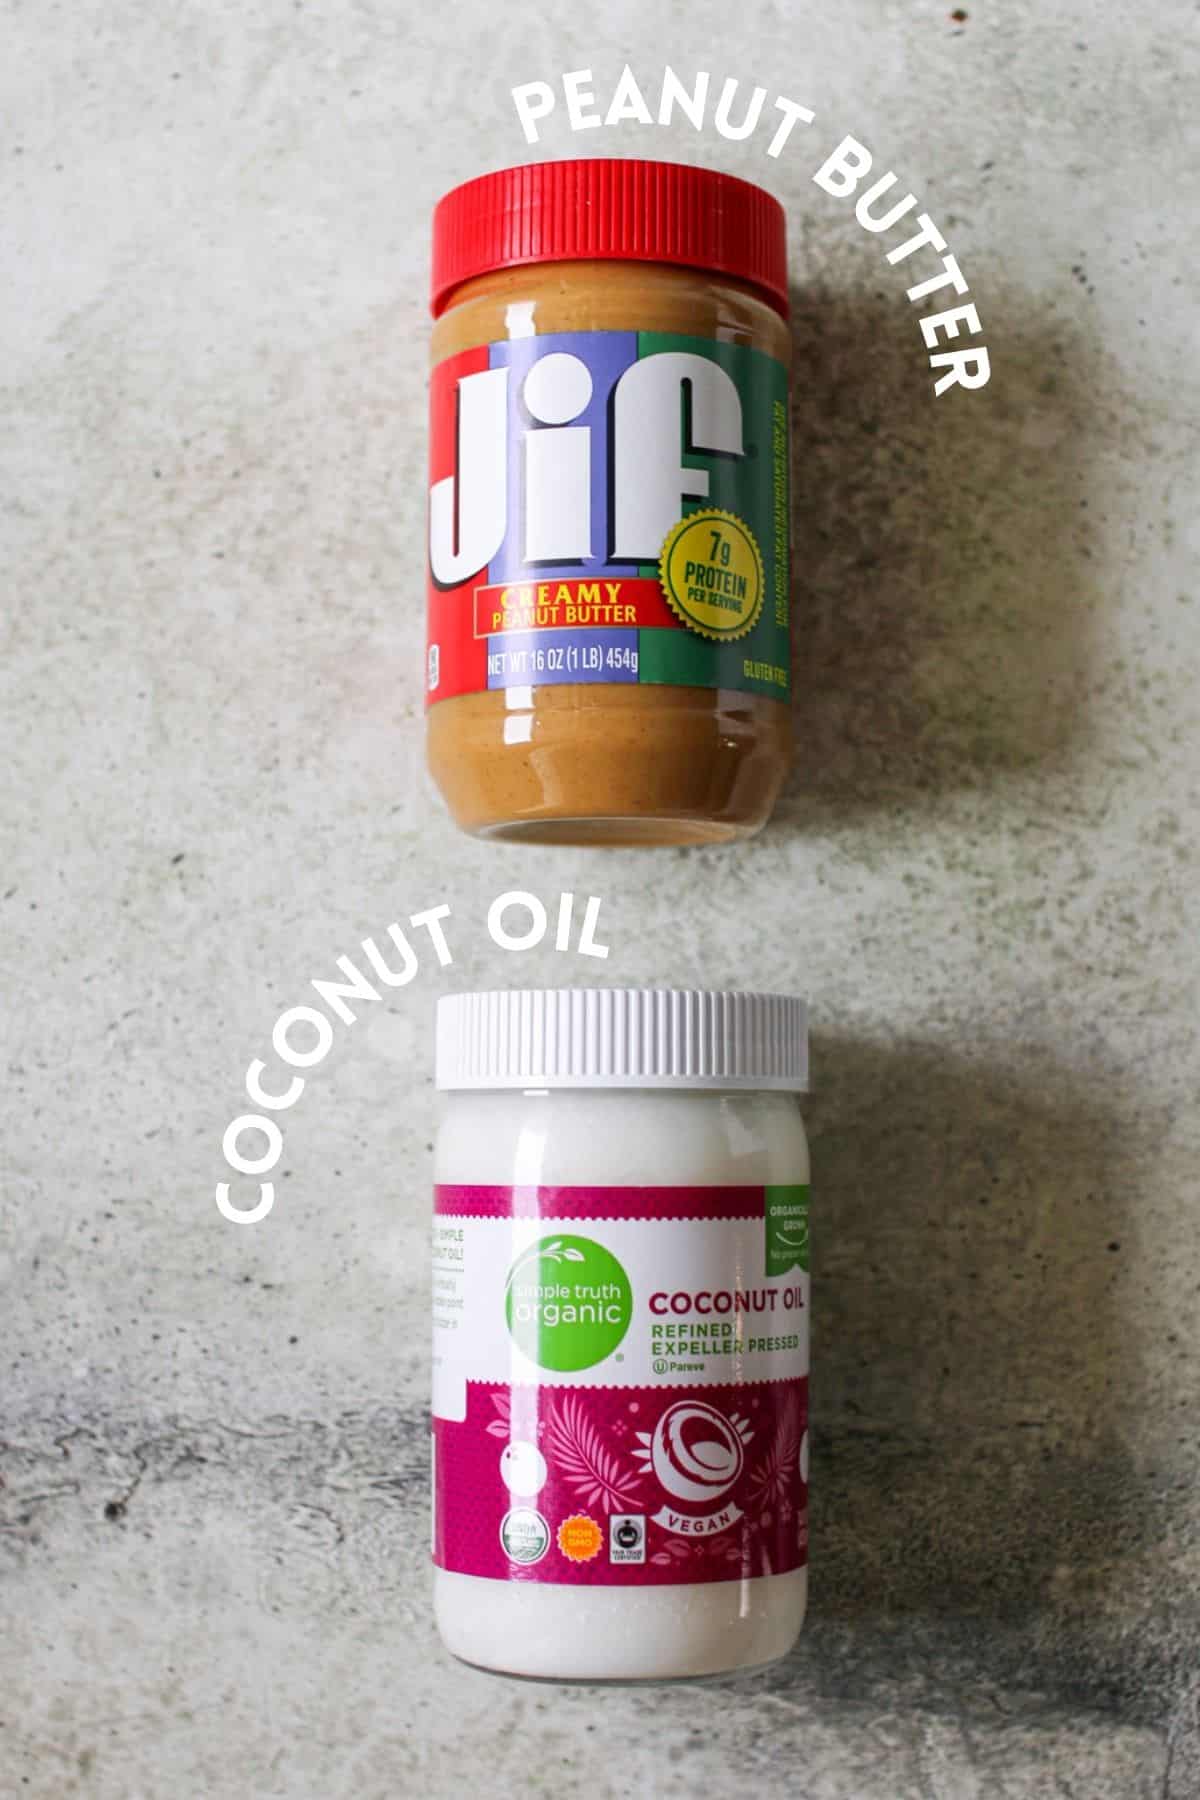 A jar of peanut butter and a jar of coconut oil on a cement background. Each it labeled with white text in alls caps.